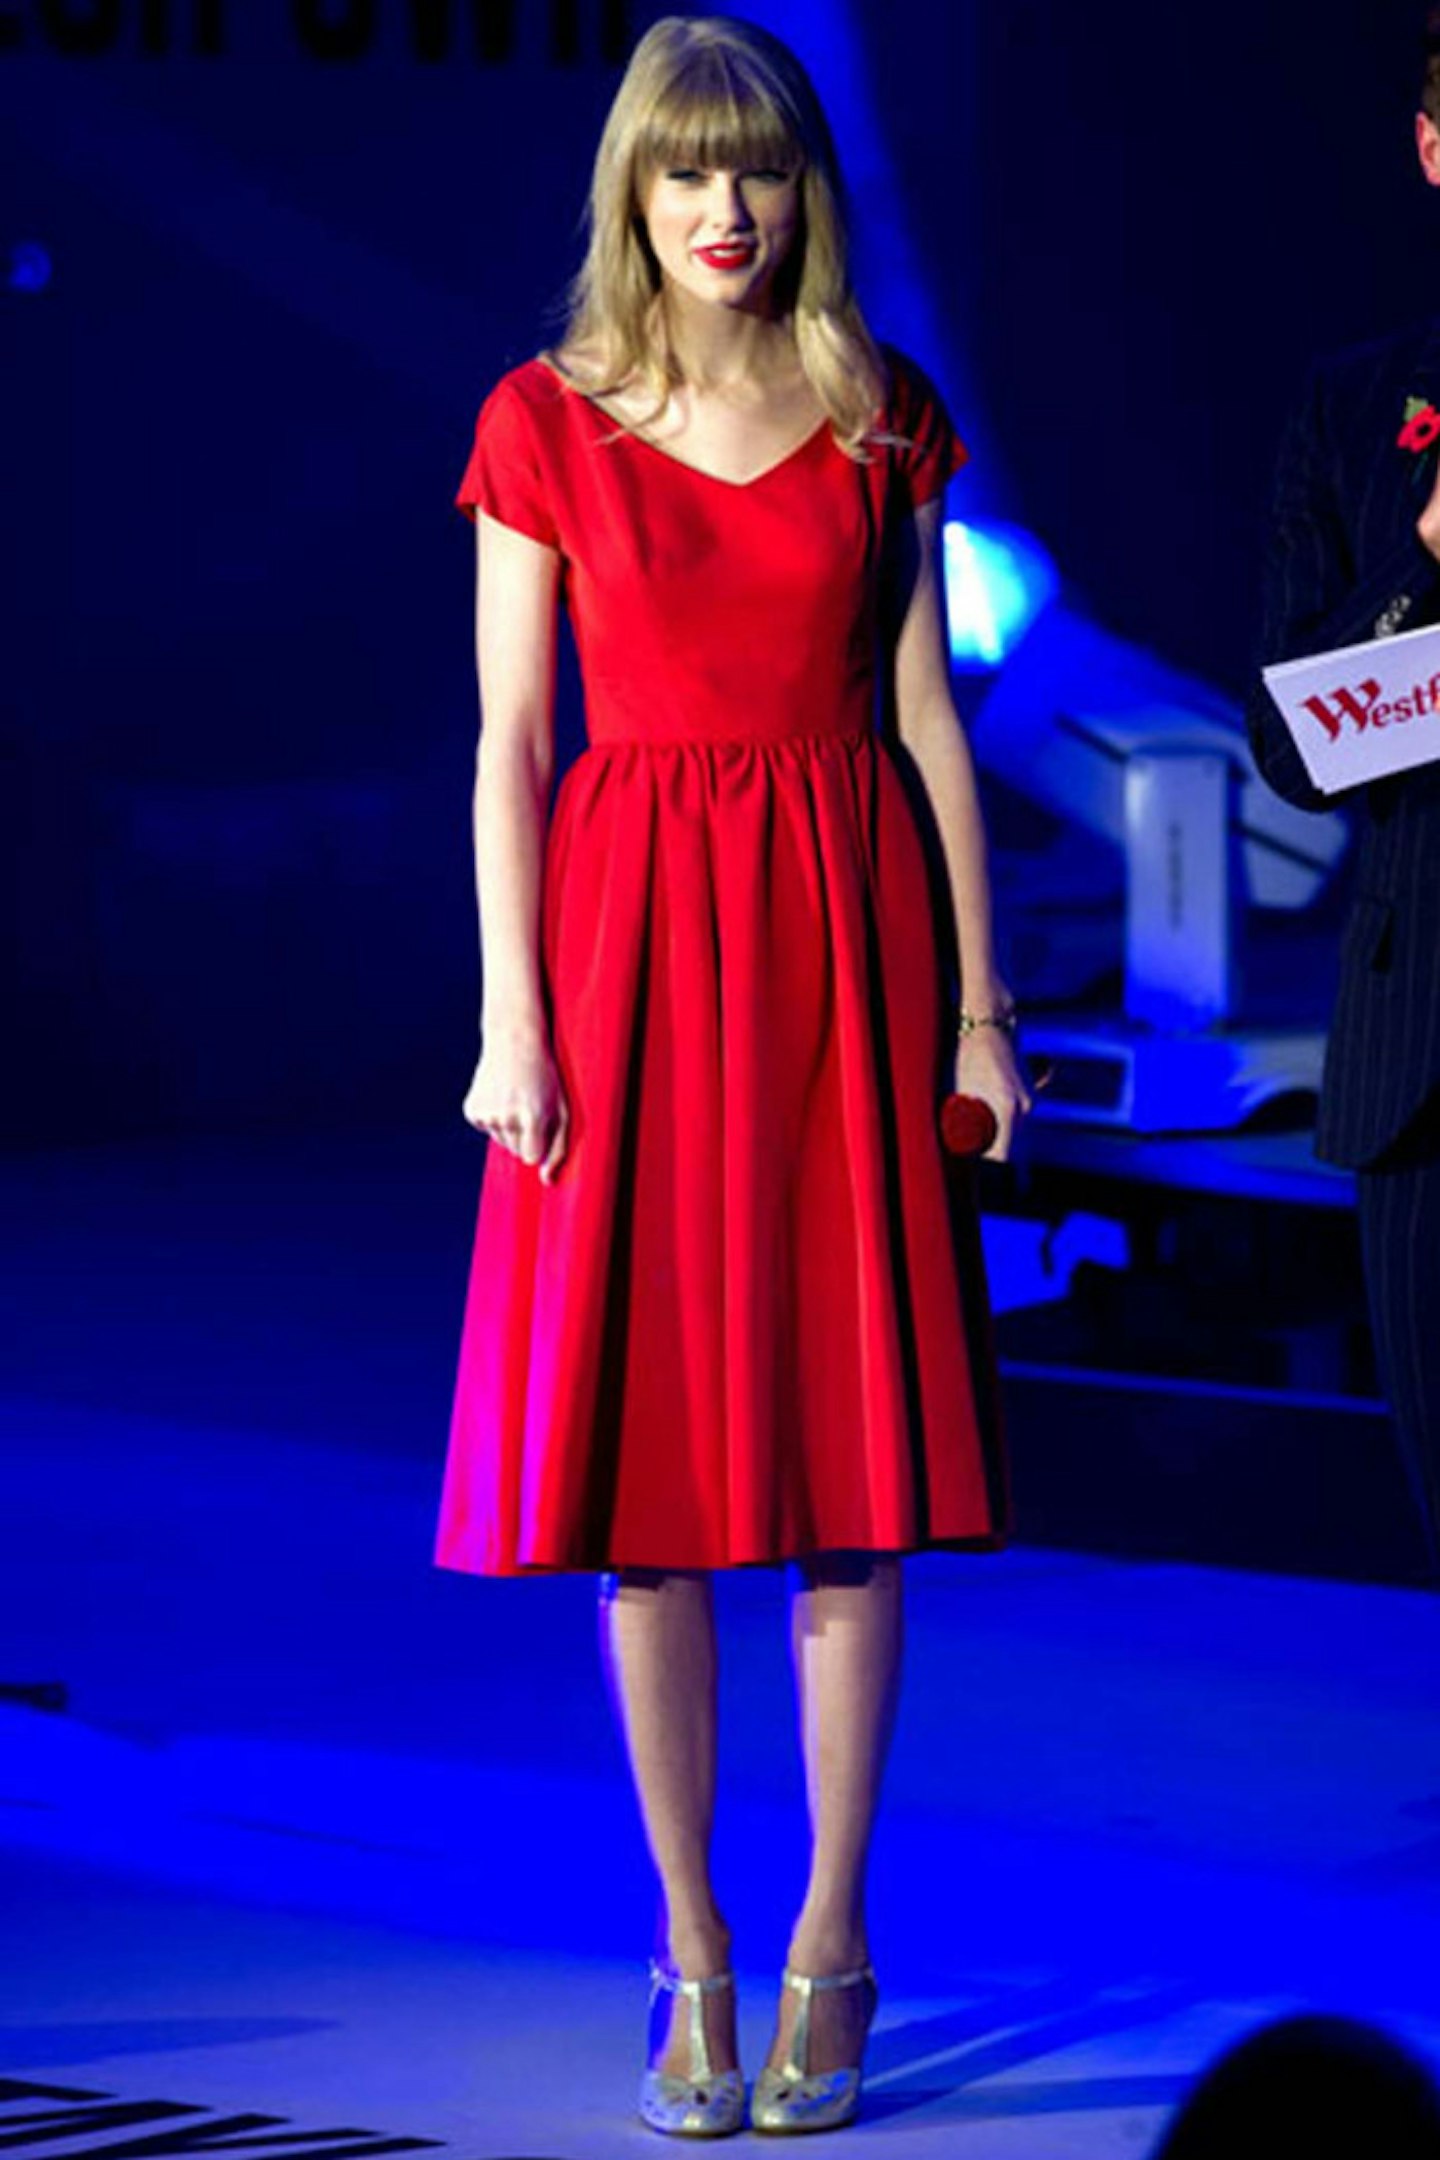 3 - Taylor Swift at Westfield Shopping Centre in London - 6 November 2012